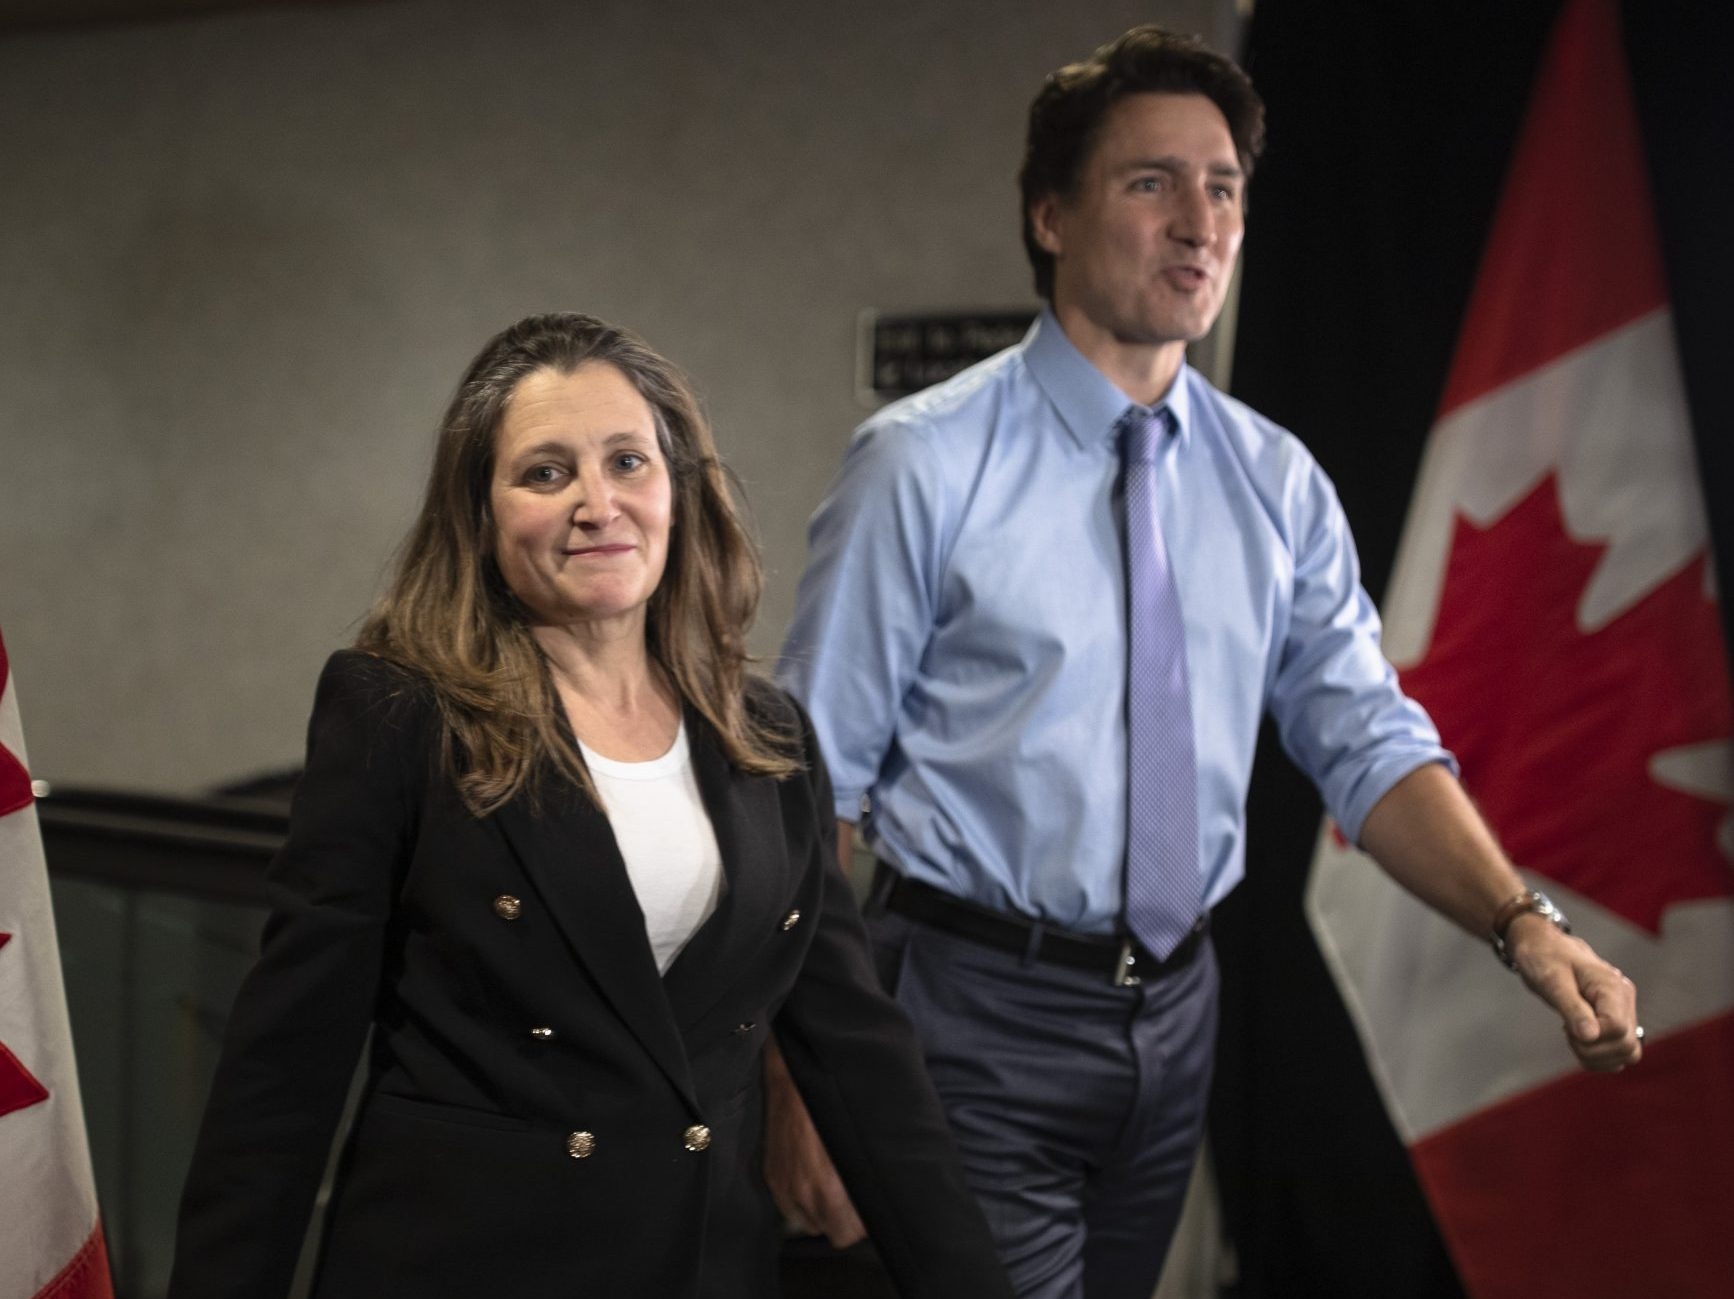 LILLEY: Prospect of recession weighs heavy on family budgets and Trudeau's political ambitions